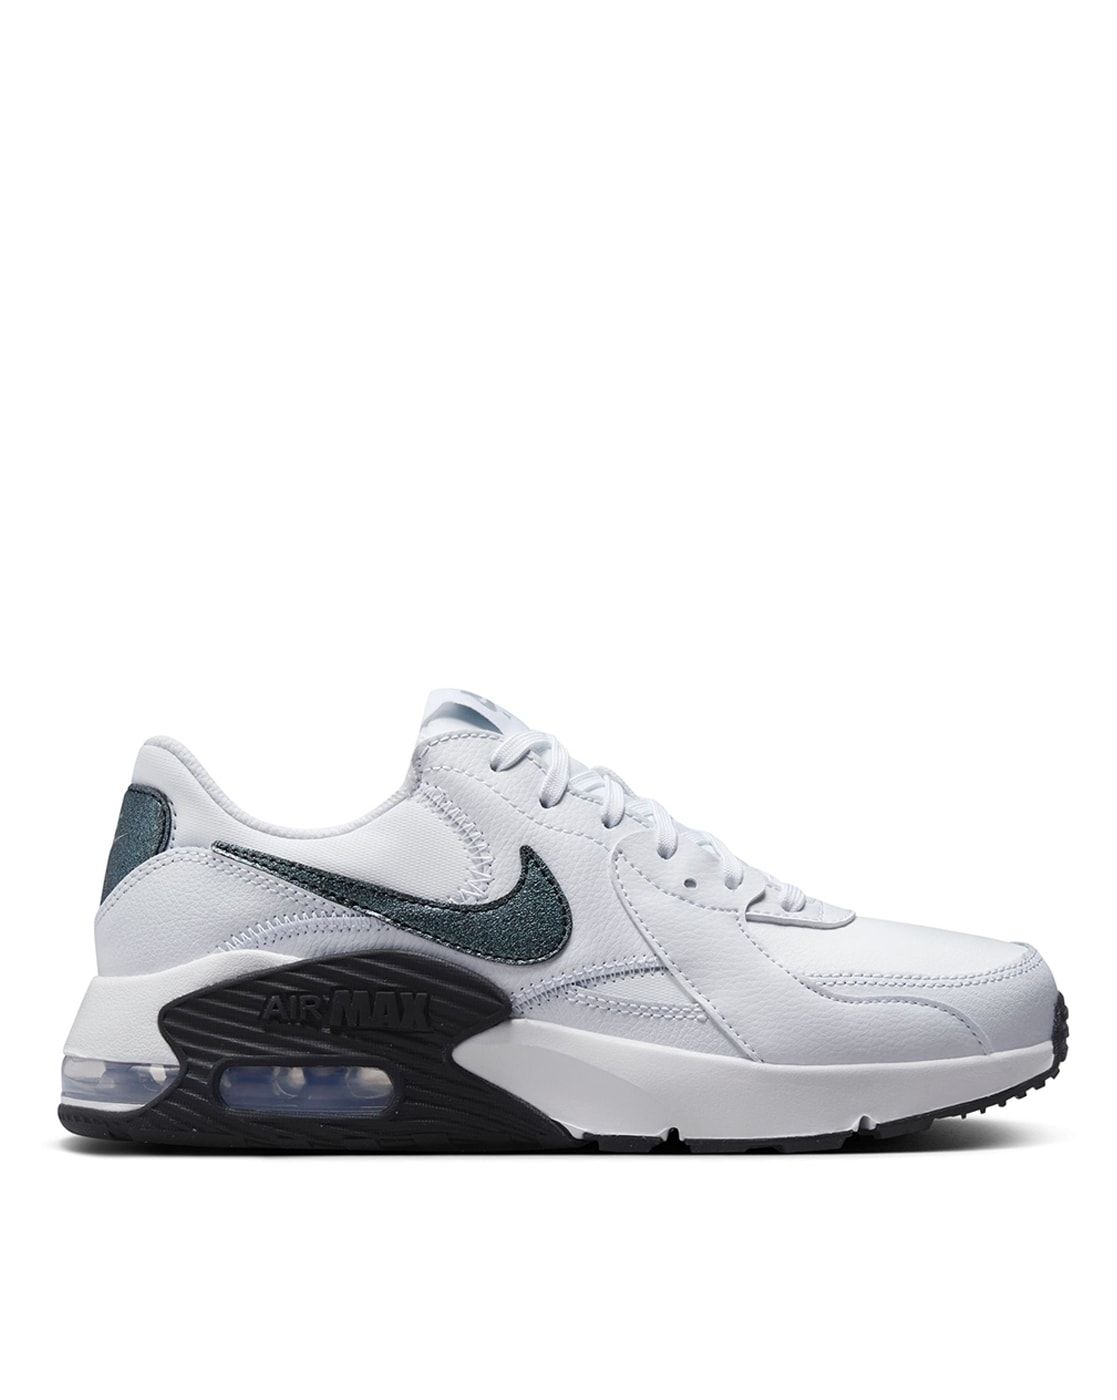 Buy Wmns Air Max Excee 'We'll Take It From Here' - DV2189 100 | GOAT